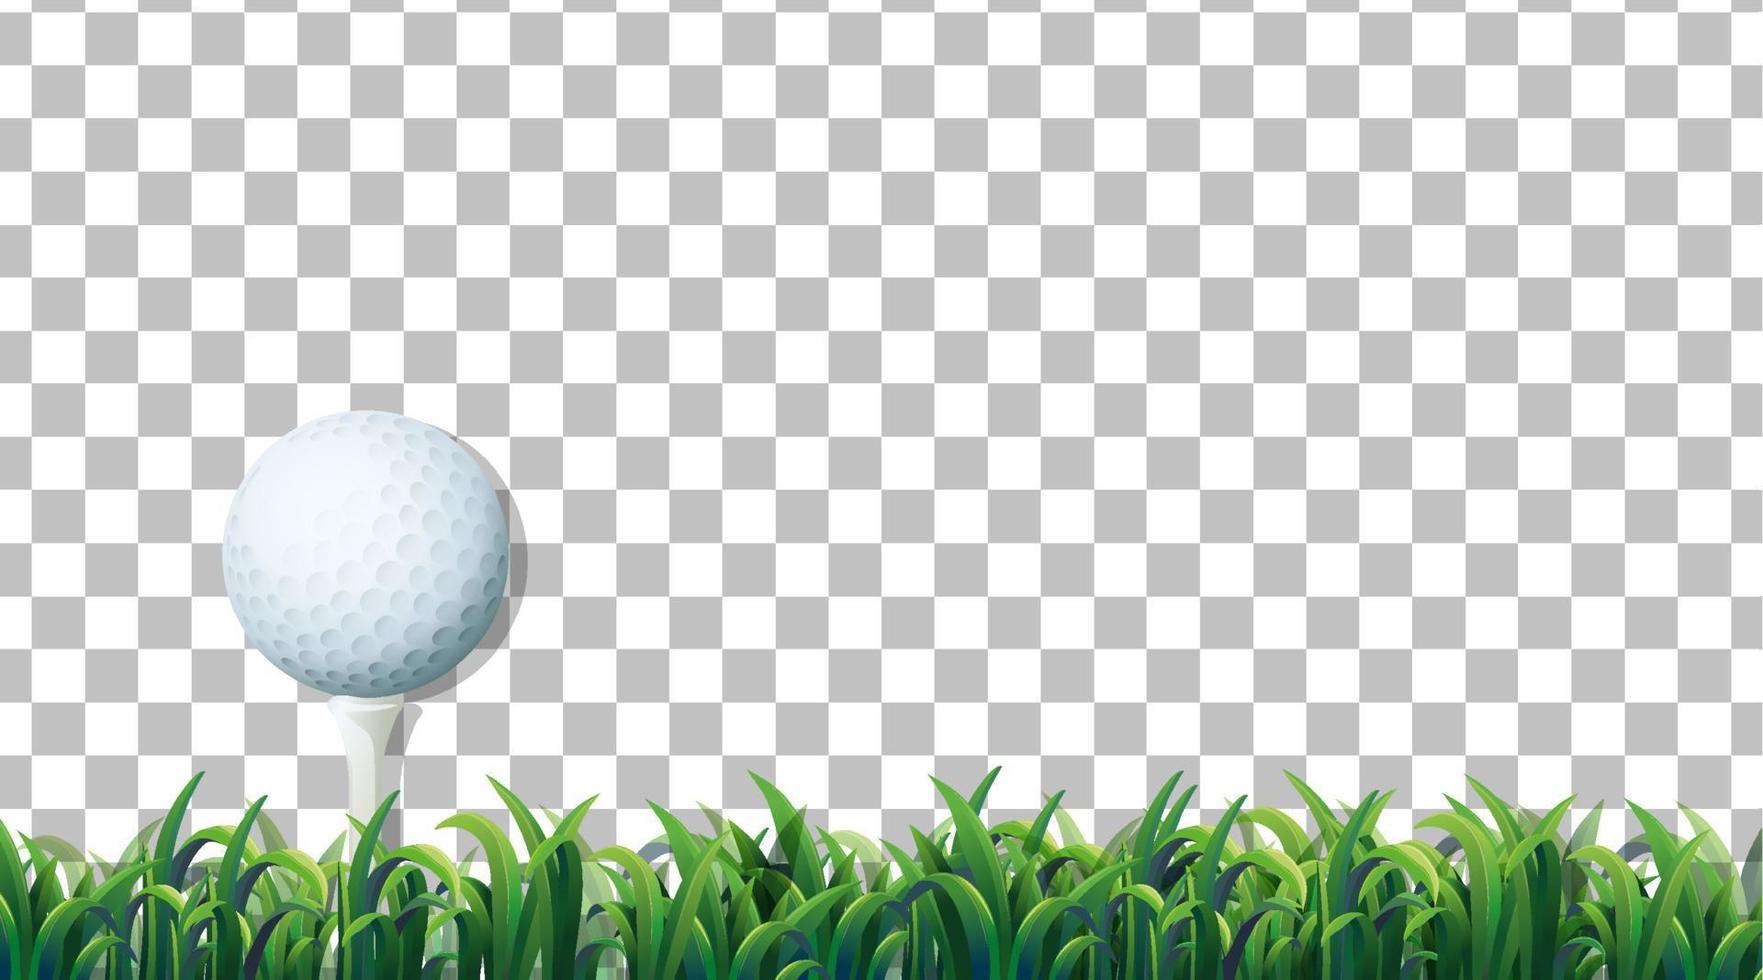 Golf ball on the grass field on grid background vector